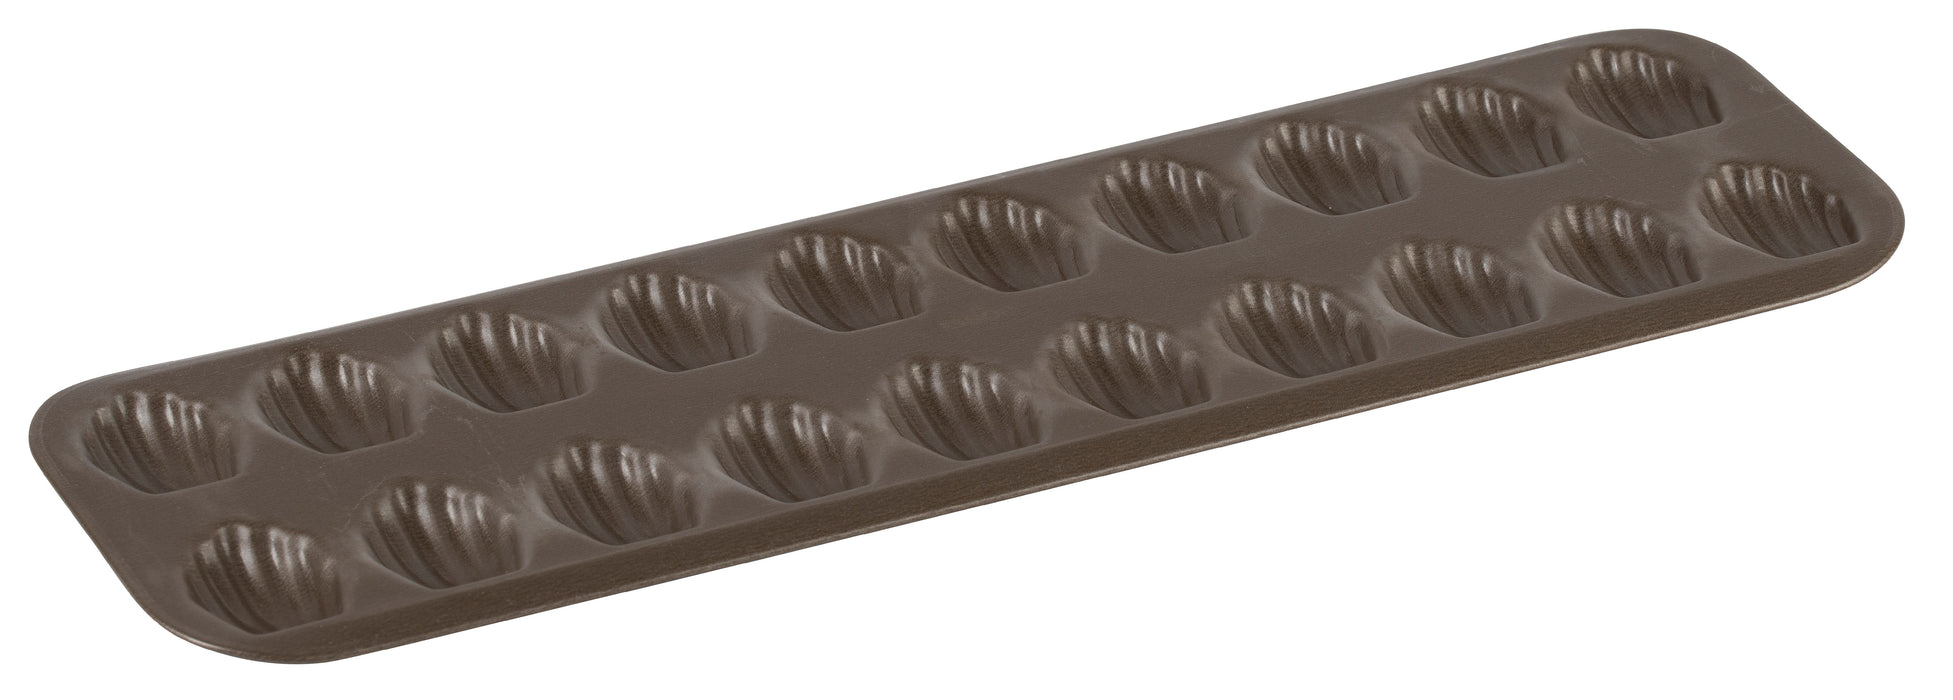 Louis Tellier 264510 Pastry Mold